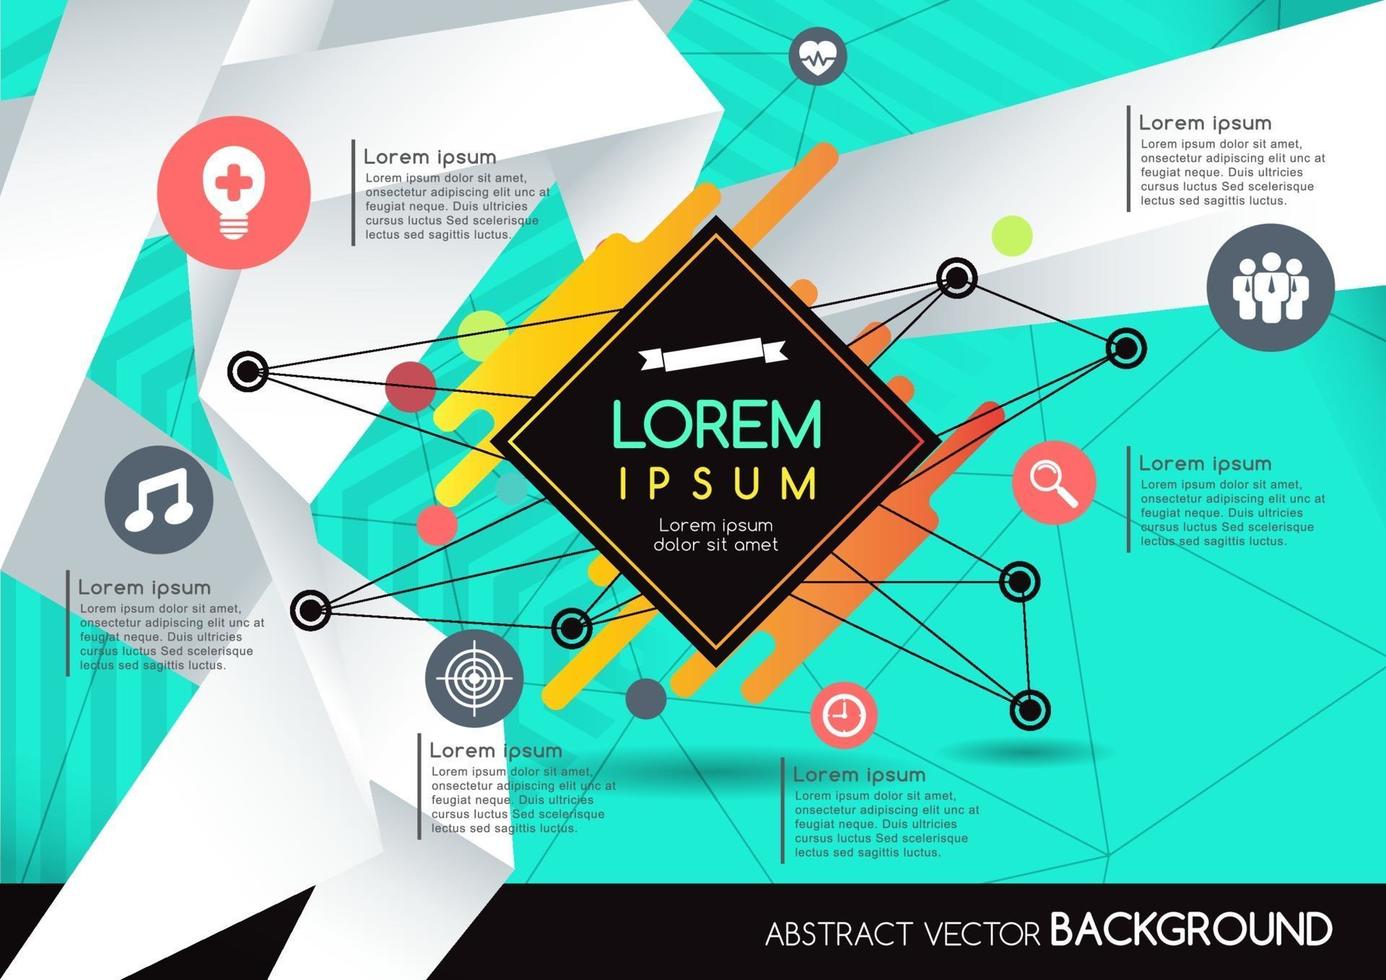 Abstract background geometry design vector